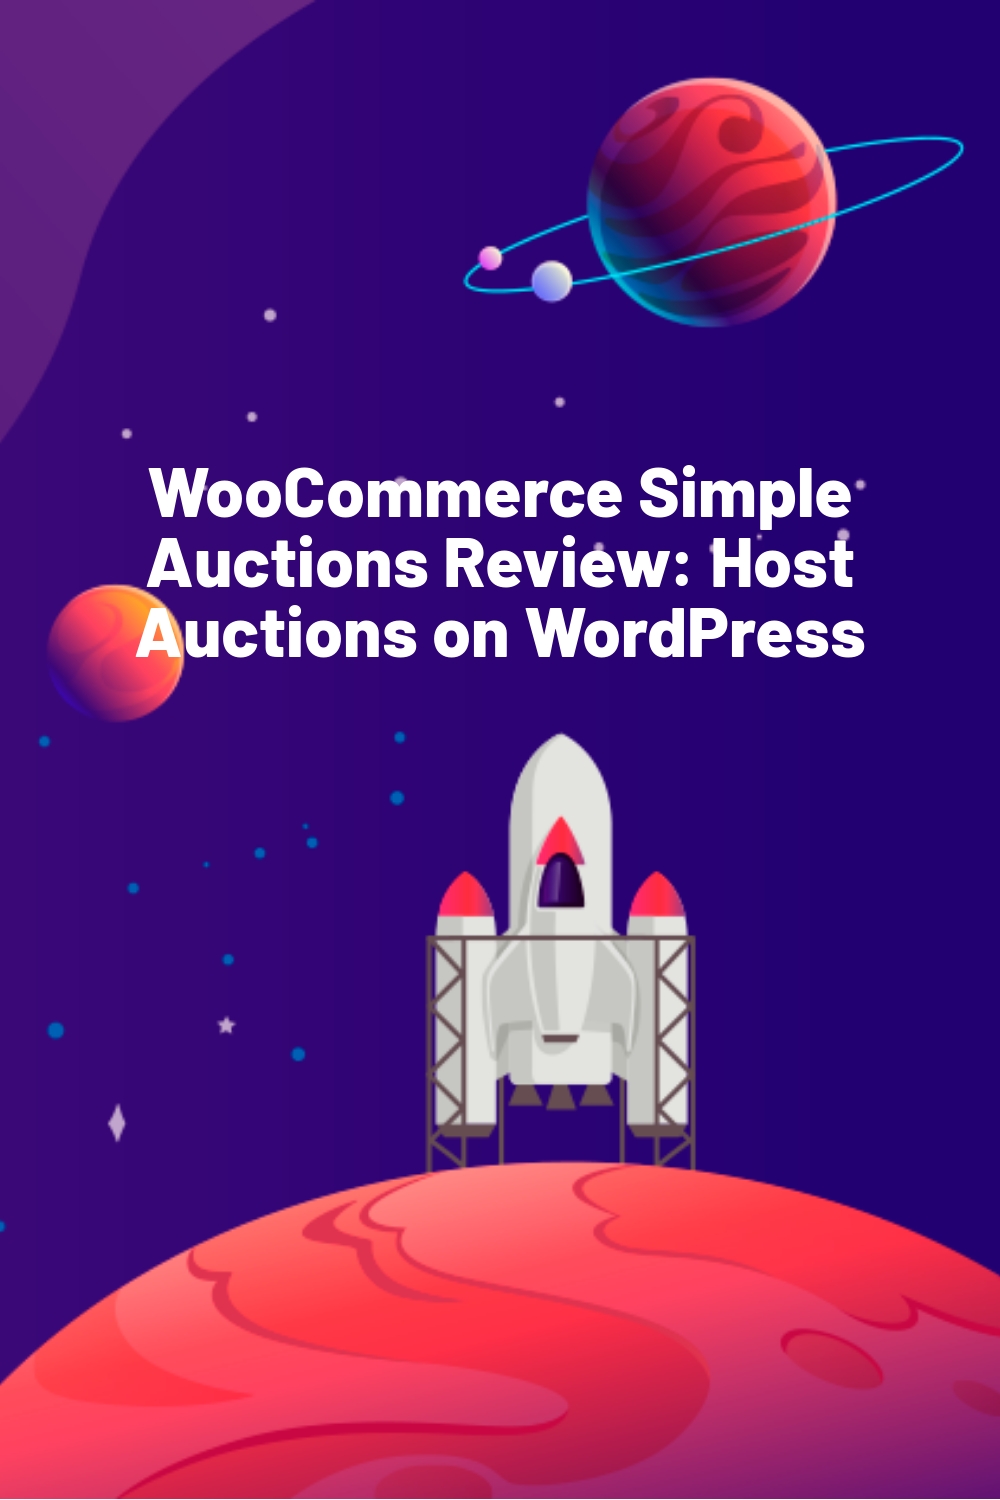 WooCommerce Simple Auctions Review: Host Auctions on WordPress